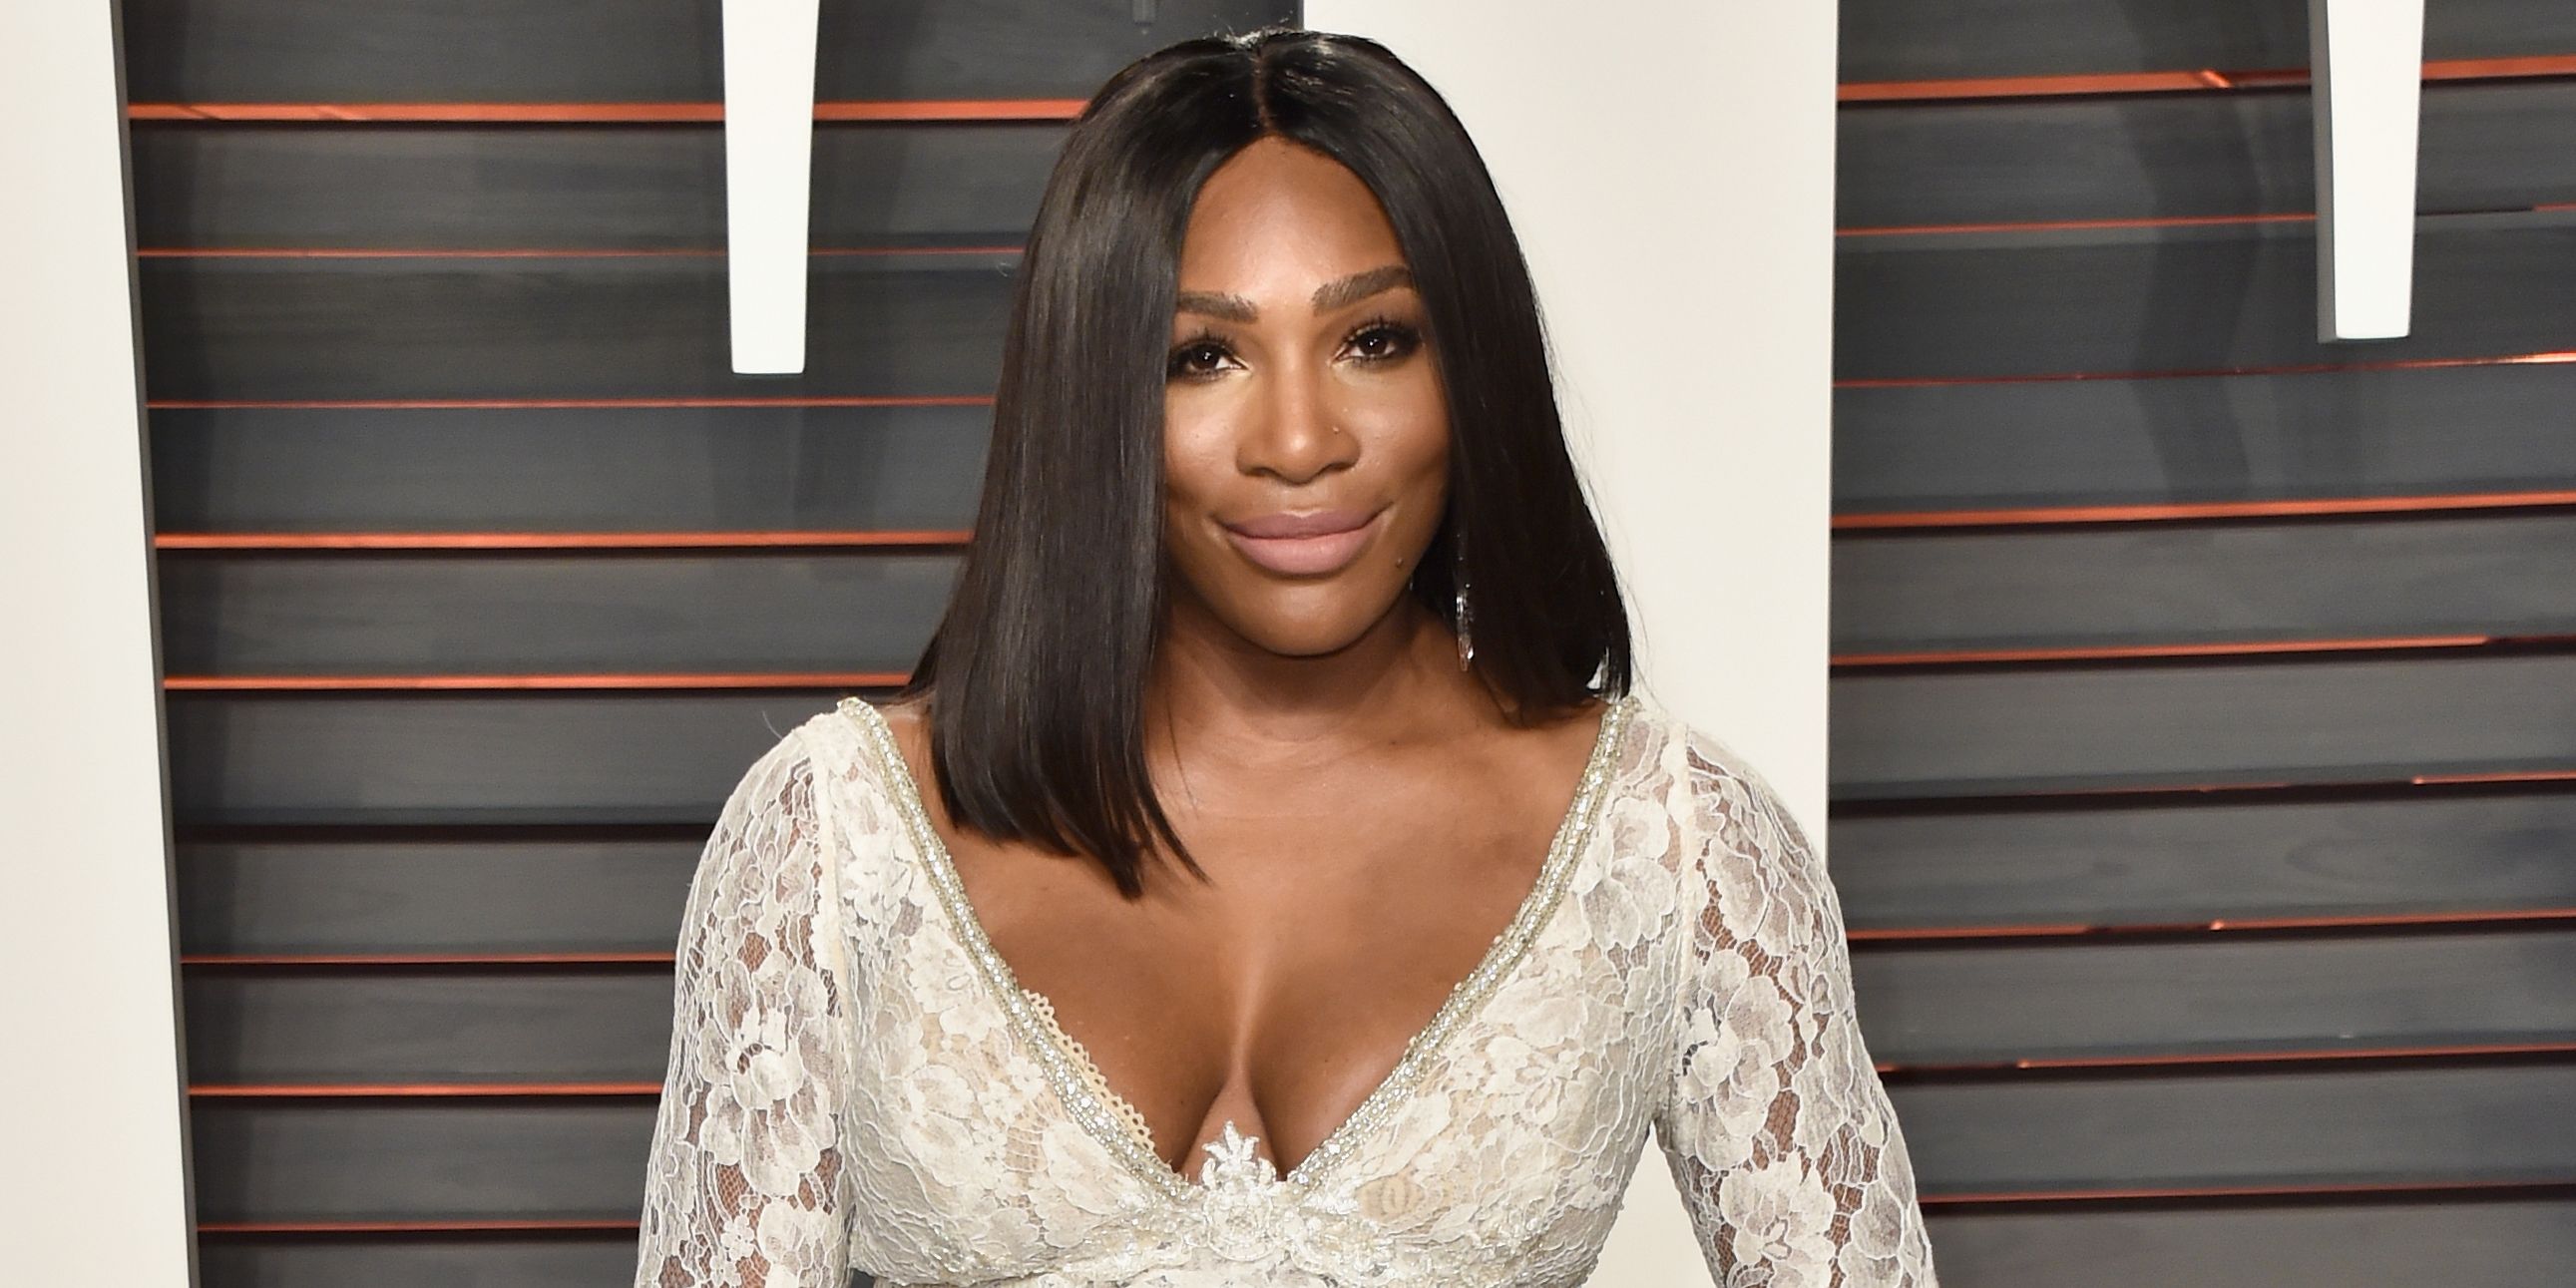 Serena Williams Ebony Celebrity Porn - Serena Williams Breaks Silence On Embracing Her Body Insecurities And  Controversial Tennis Outfits